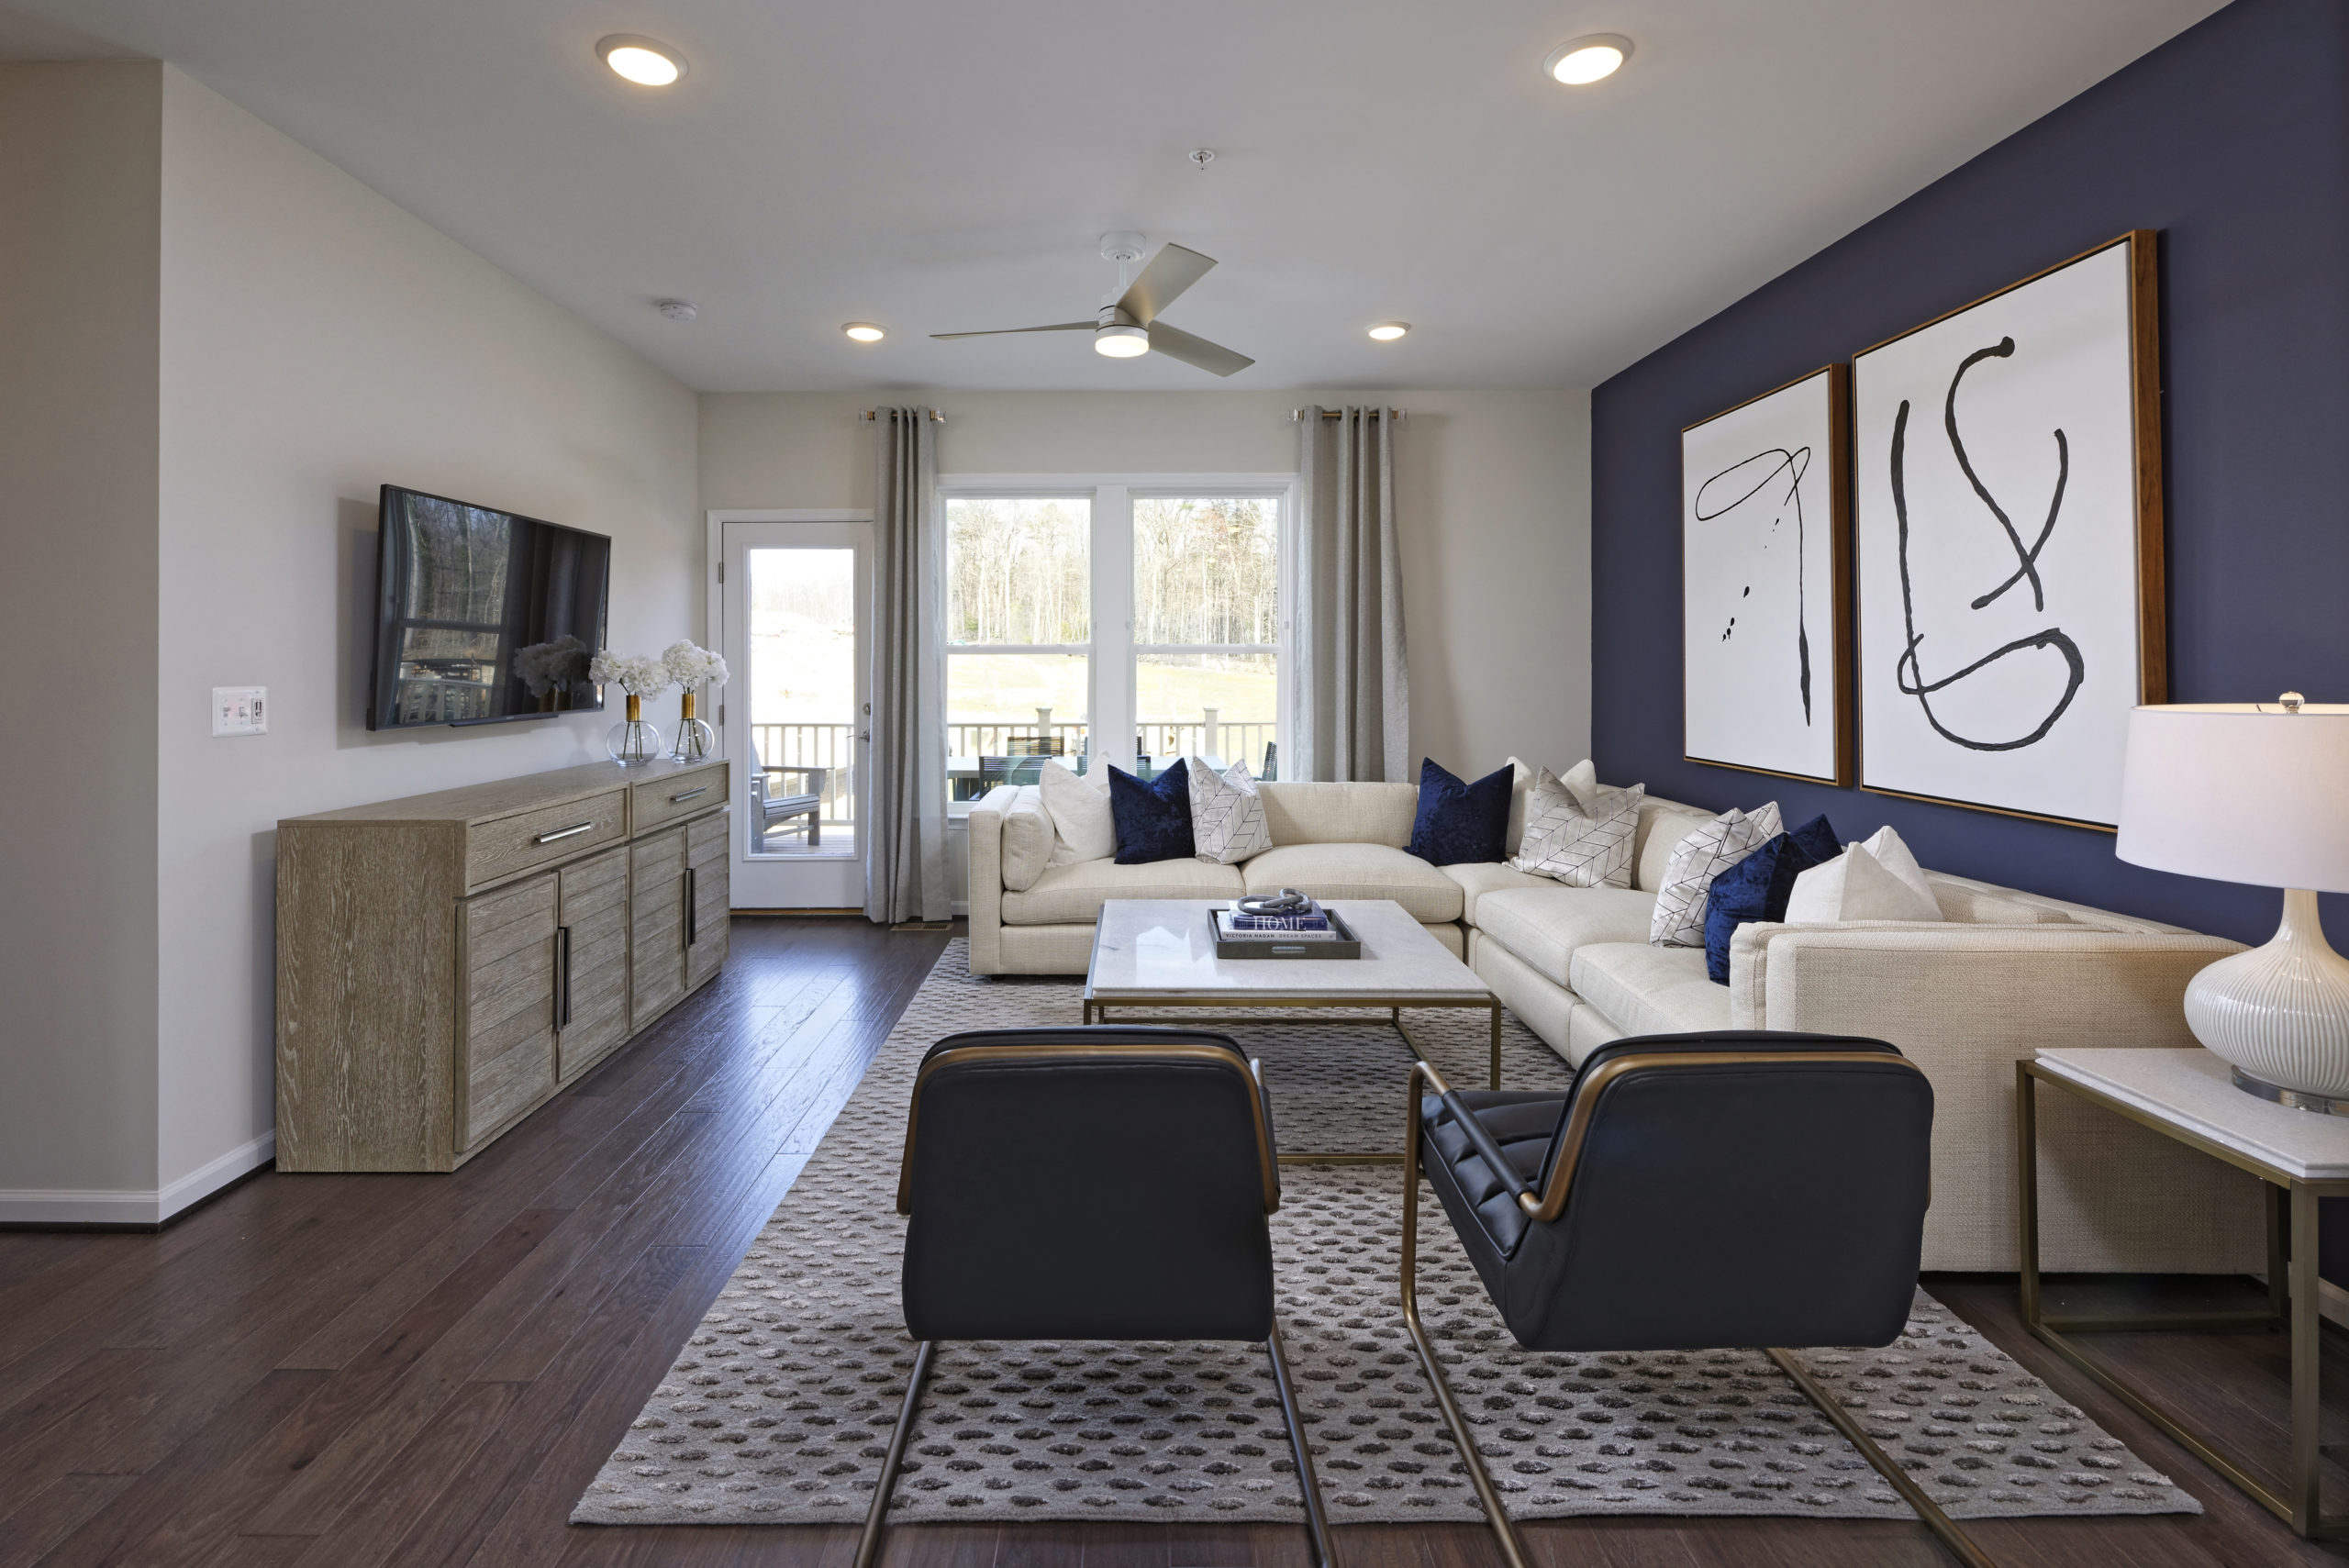 Pulte's Greywood model provides ample gathering space and has up to 5 bedrooms and 4.5 baths.